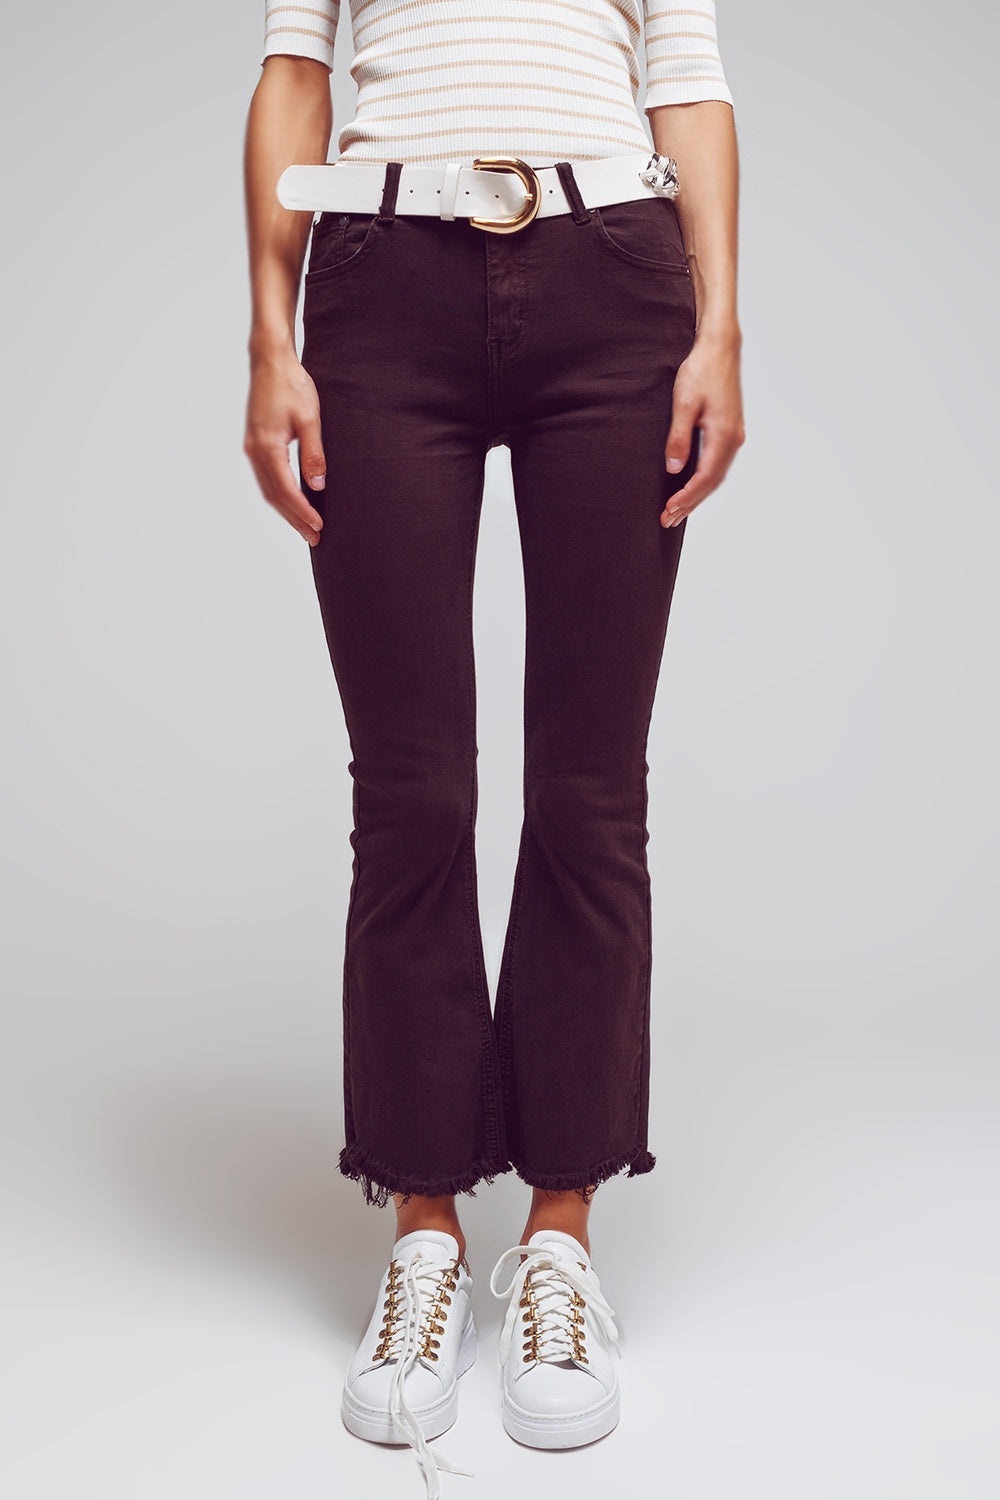 Q2 Flare jeans with raw hem edge in brown